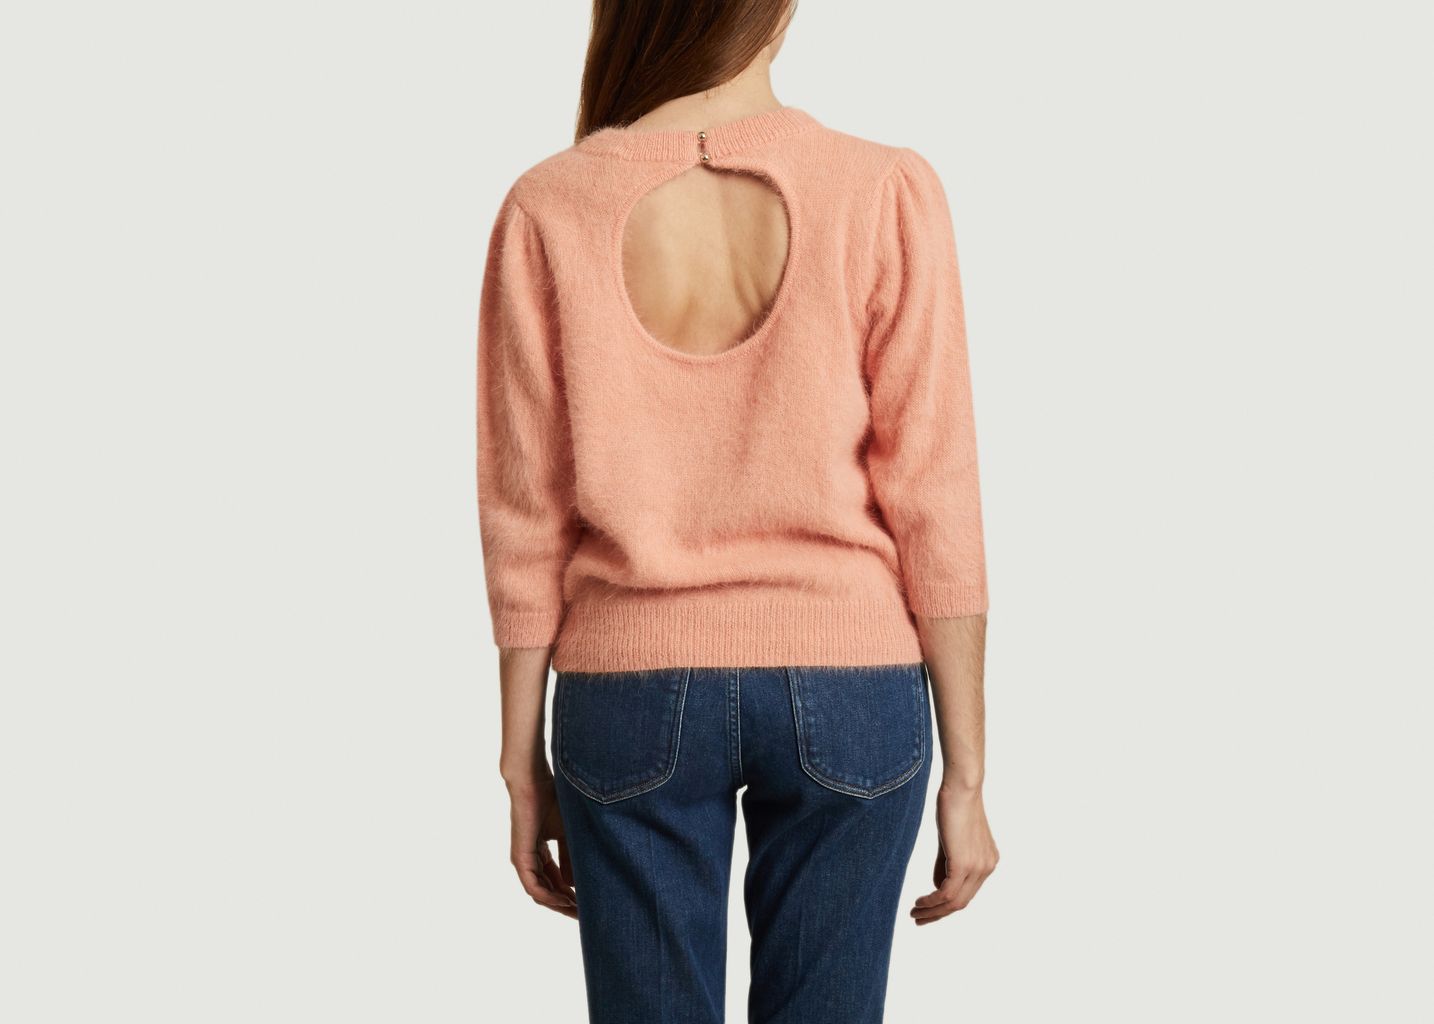 Fitzgerald 3/4 sleeves sweater with open back - Jolie Jolie